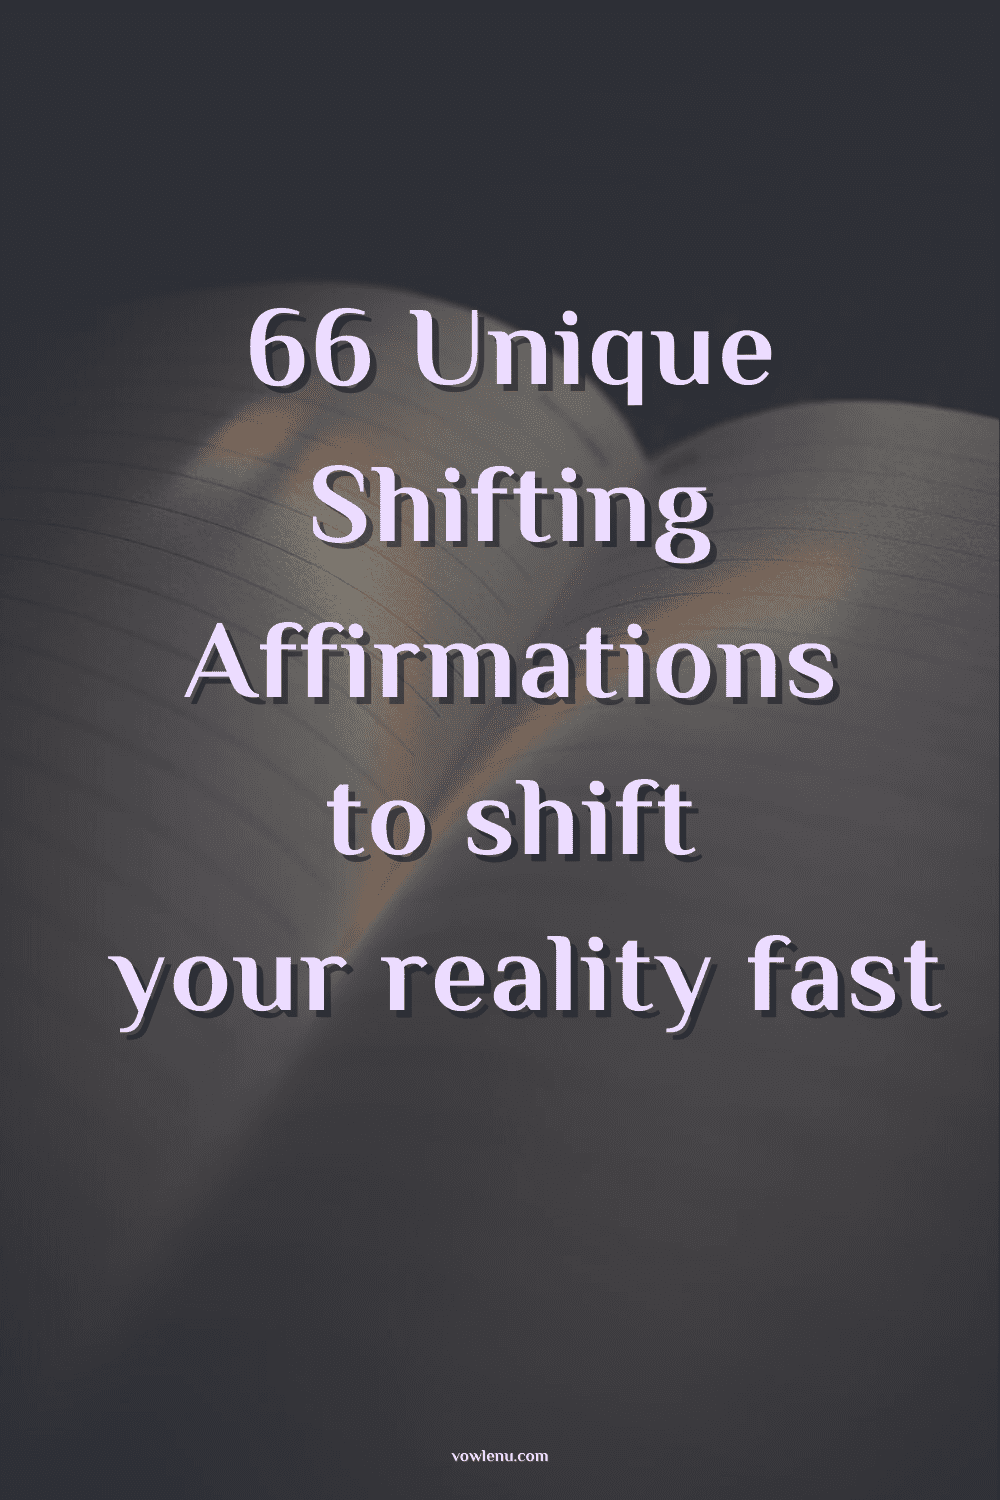 66 Unique Shifting Affirmations to shift your reality fast